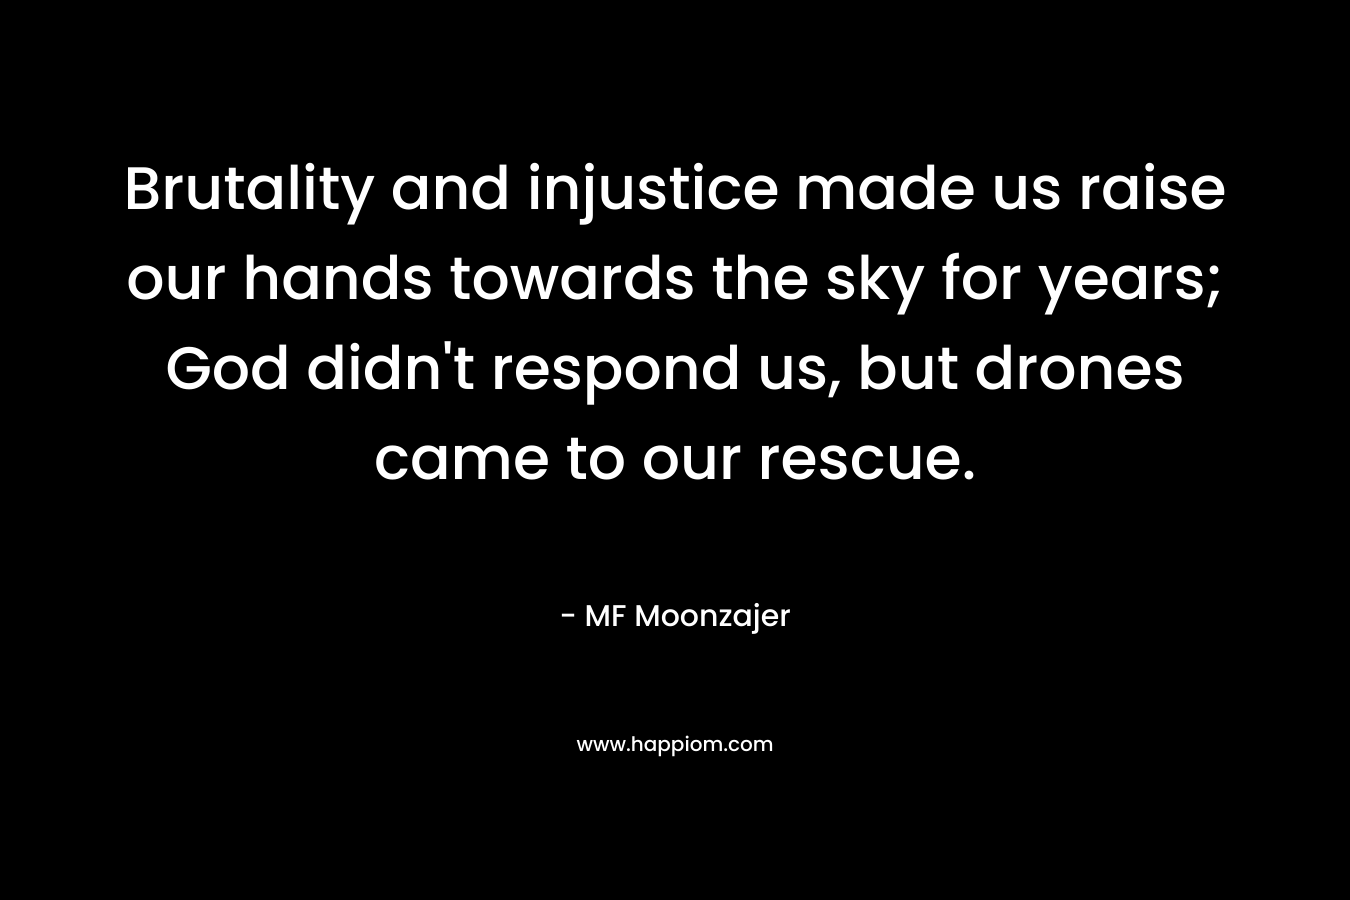 Brutality and injustice made us raise our hands towards the sky for years; God didn’t respond us, but drones came to our rescue. – MF Moonzajer